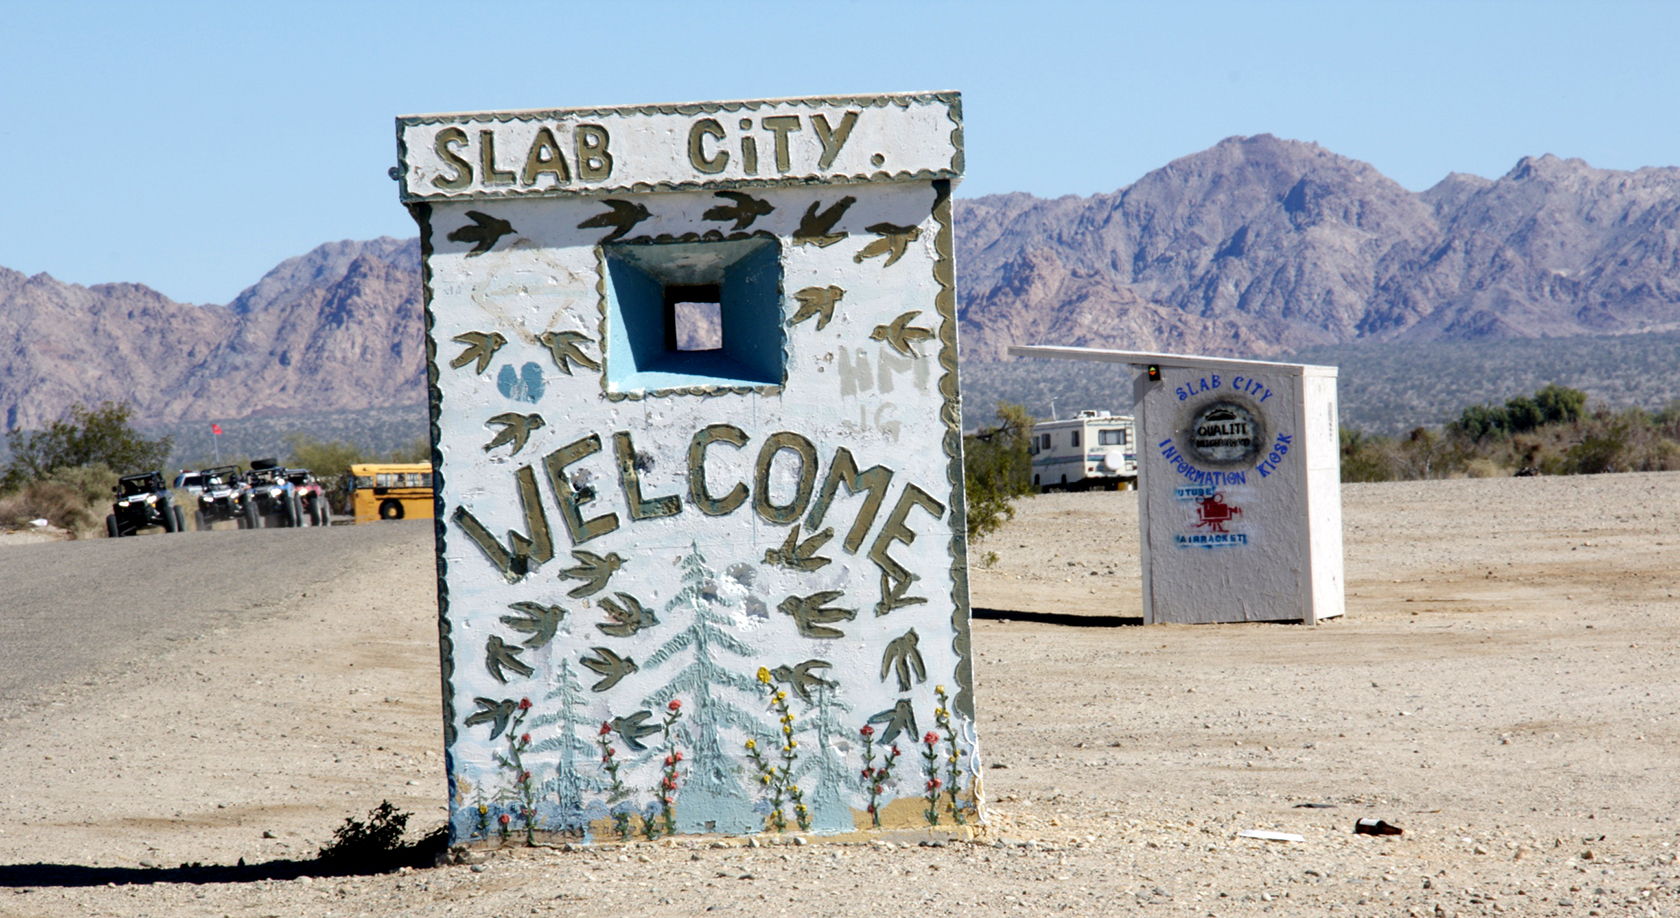 Residents of Slab City call themselves the "Slabs," which might p...